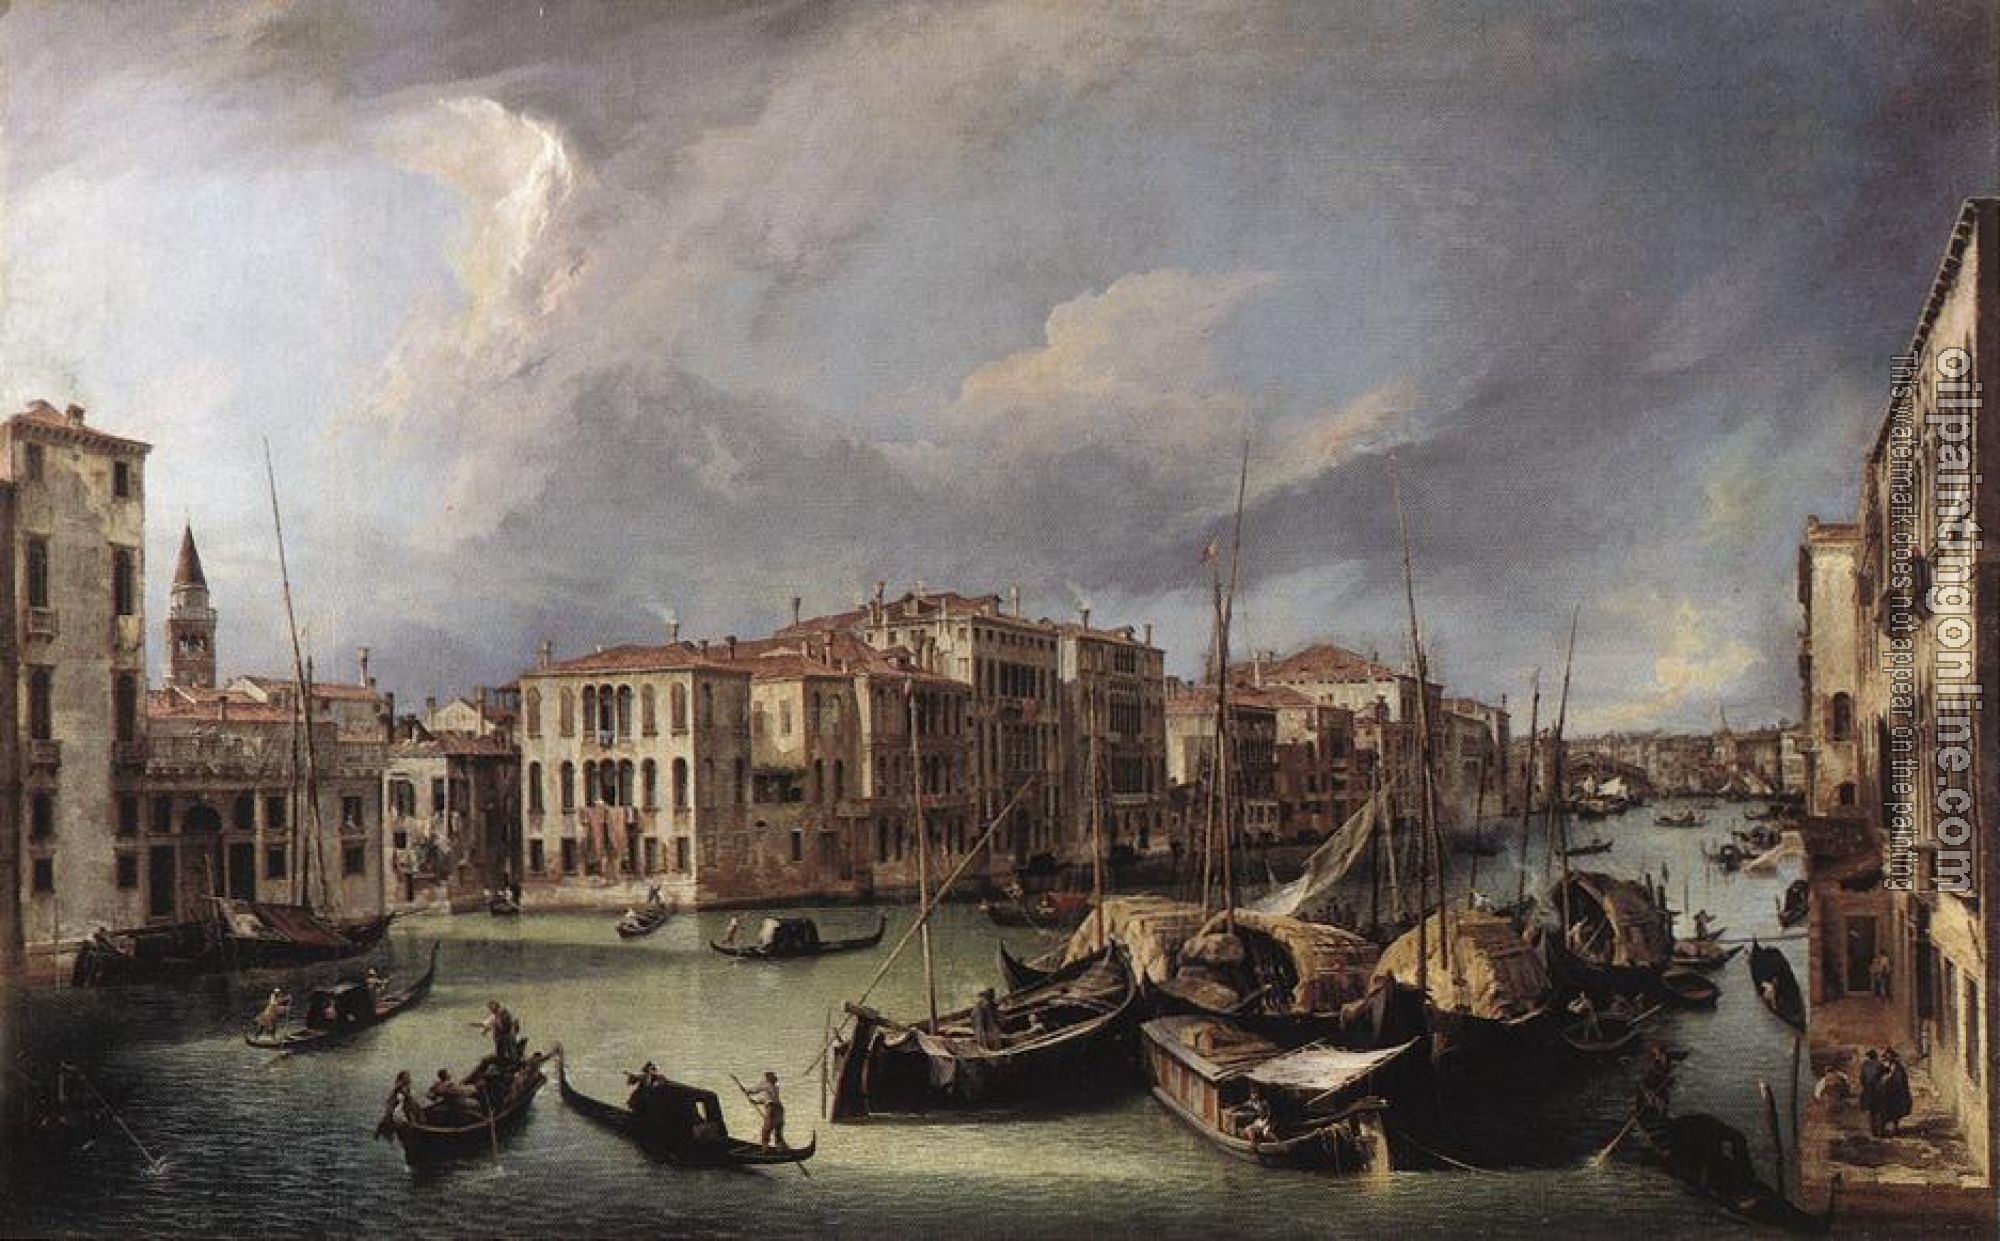 Canaletto - The Grand Canal with the Rialto Bridge in the Background